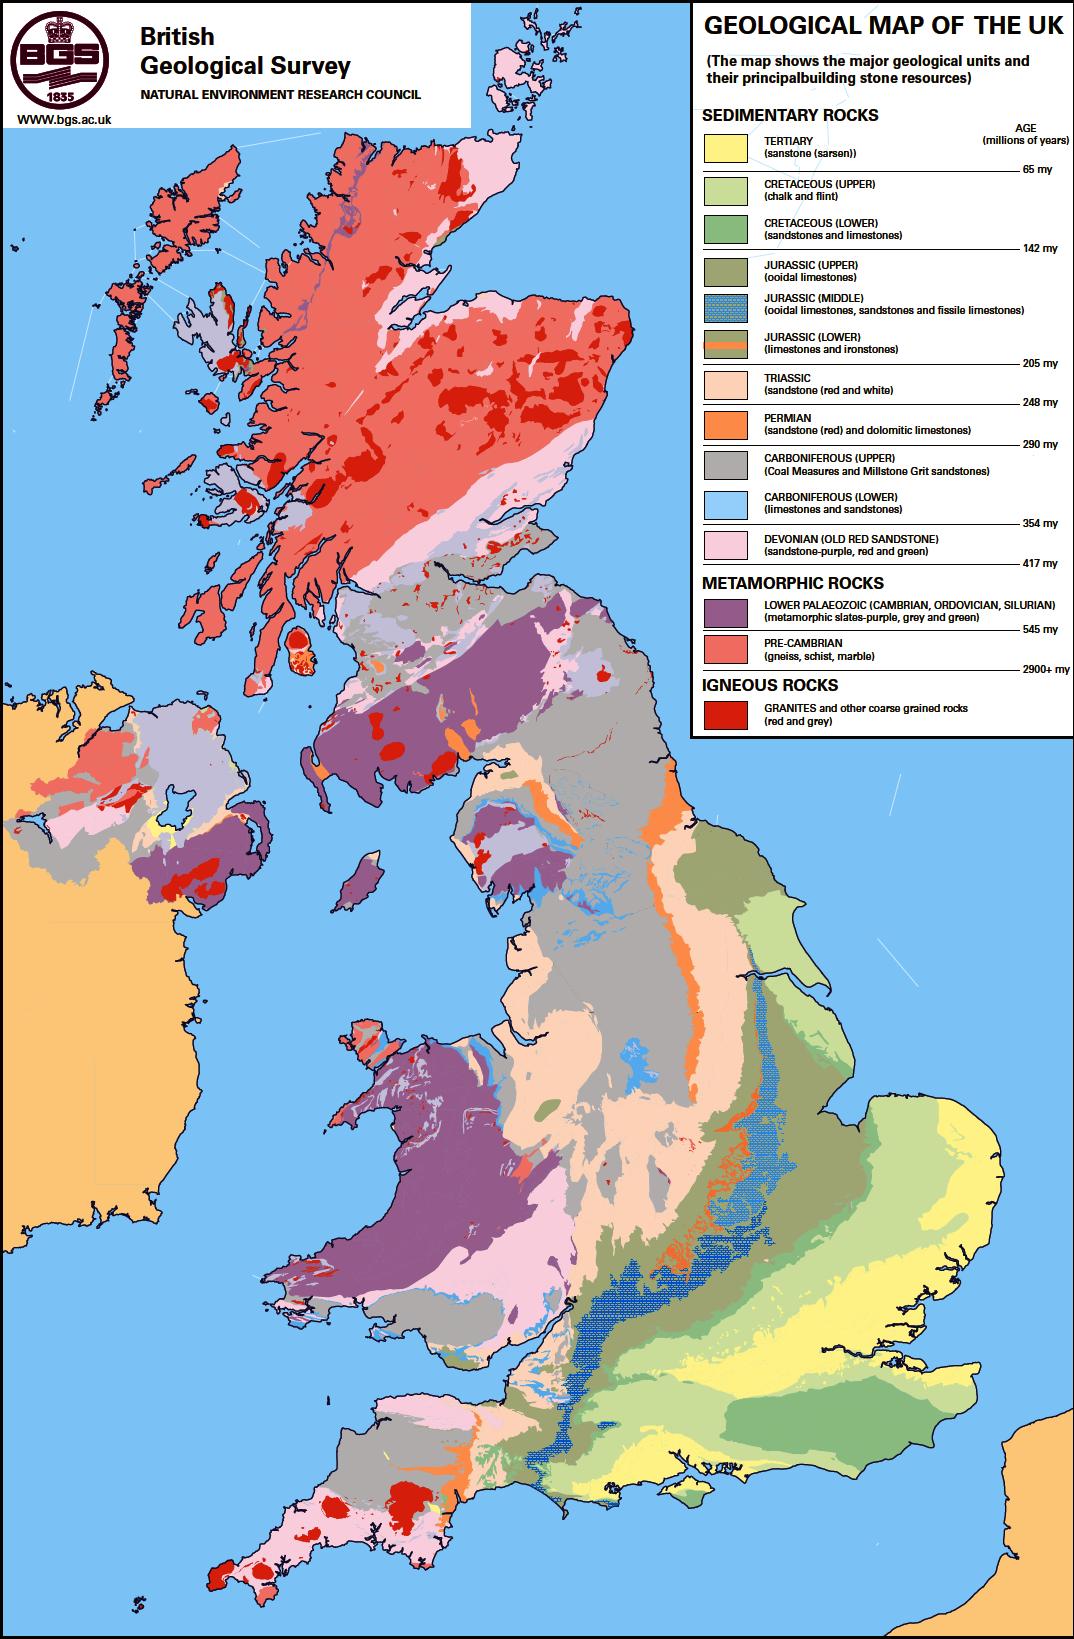 geological-map-of-uk-geological-map-of-britain-northern-europe-europe